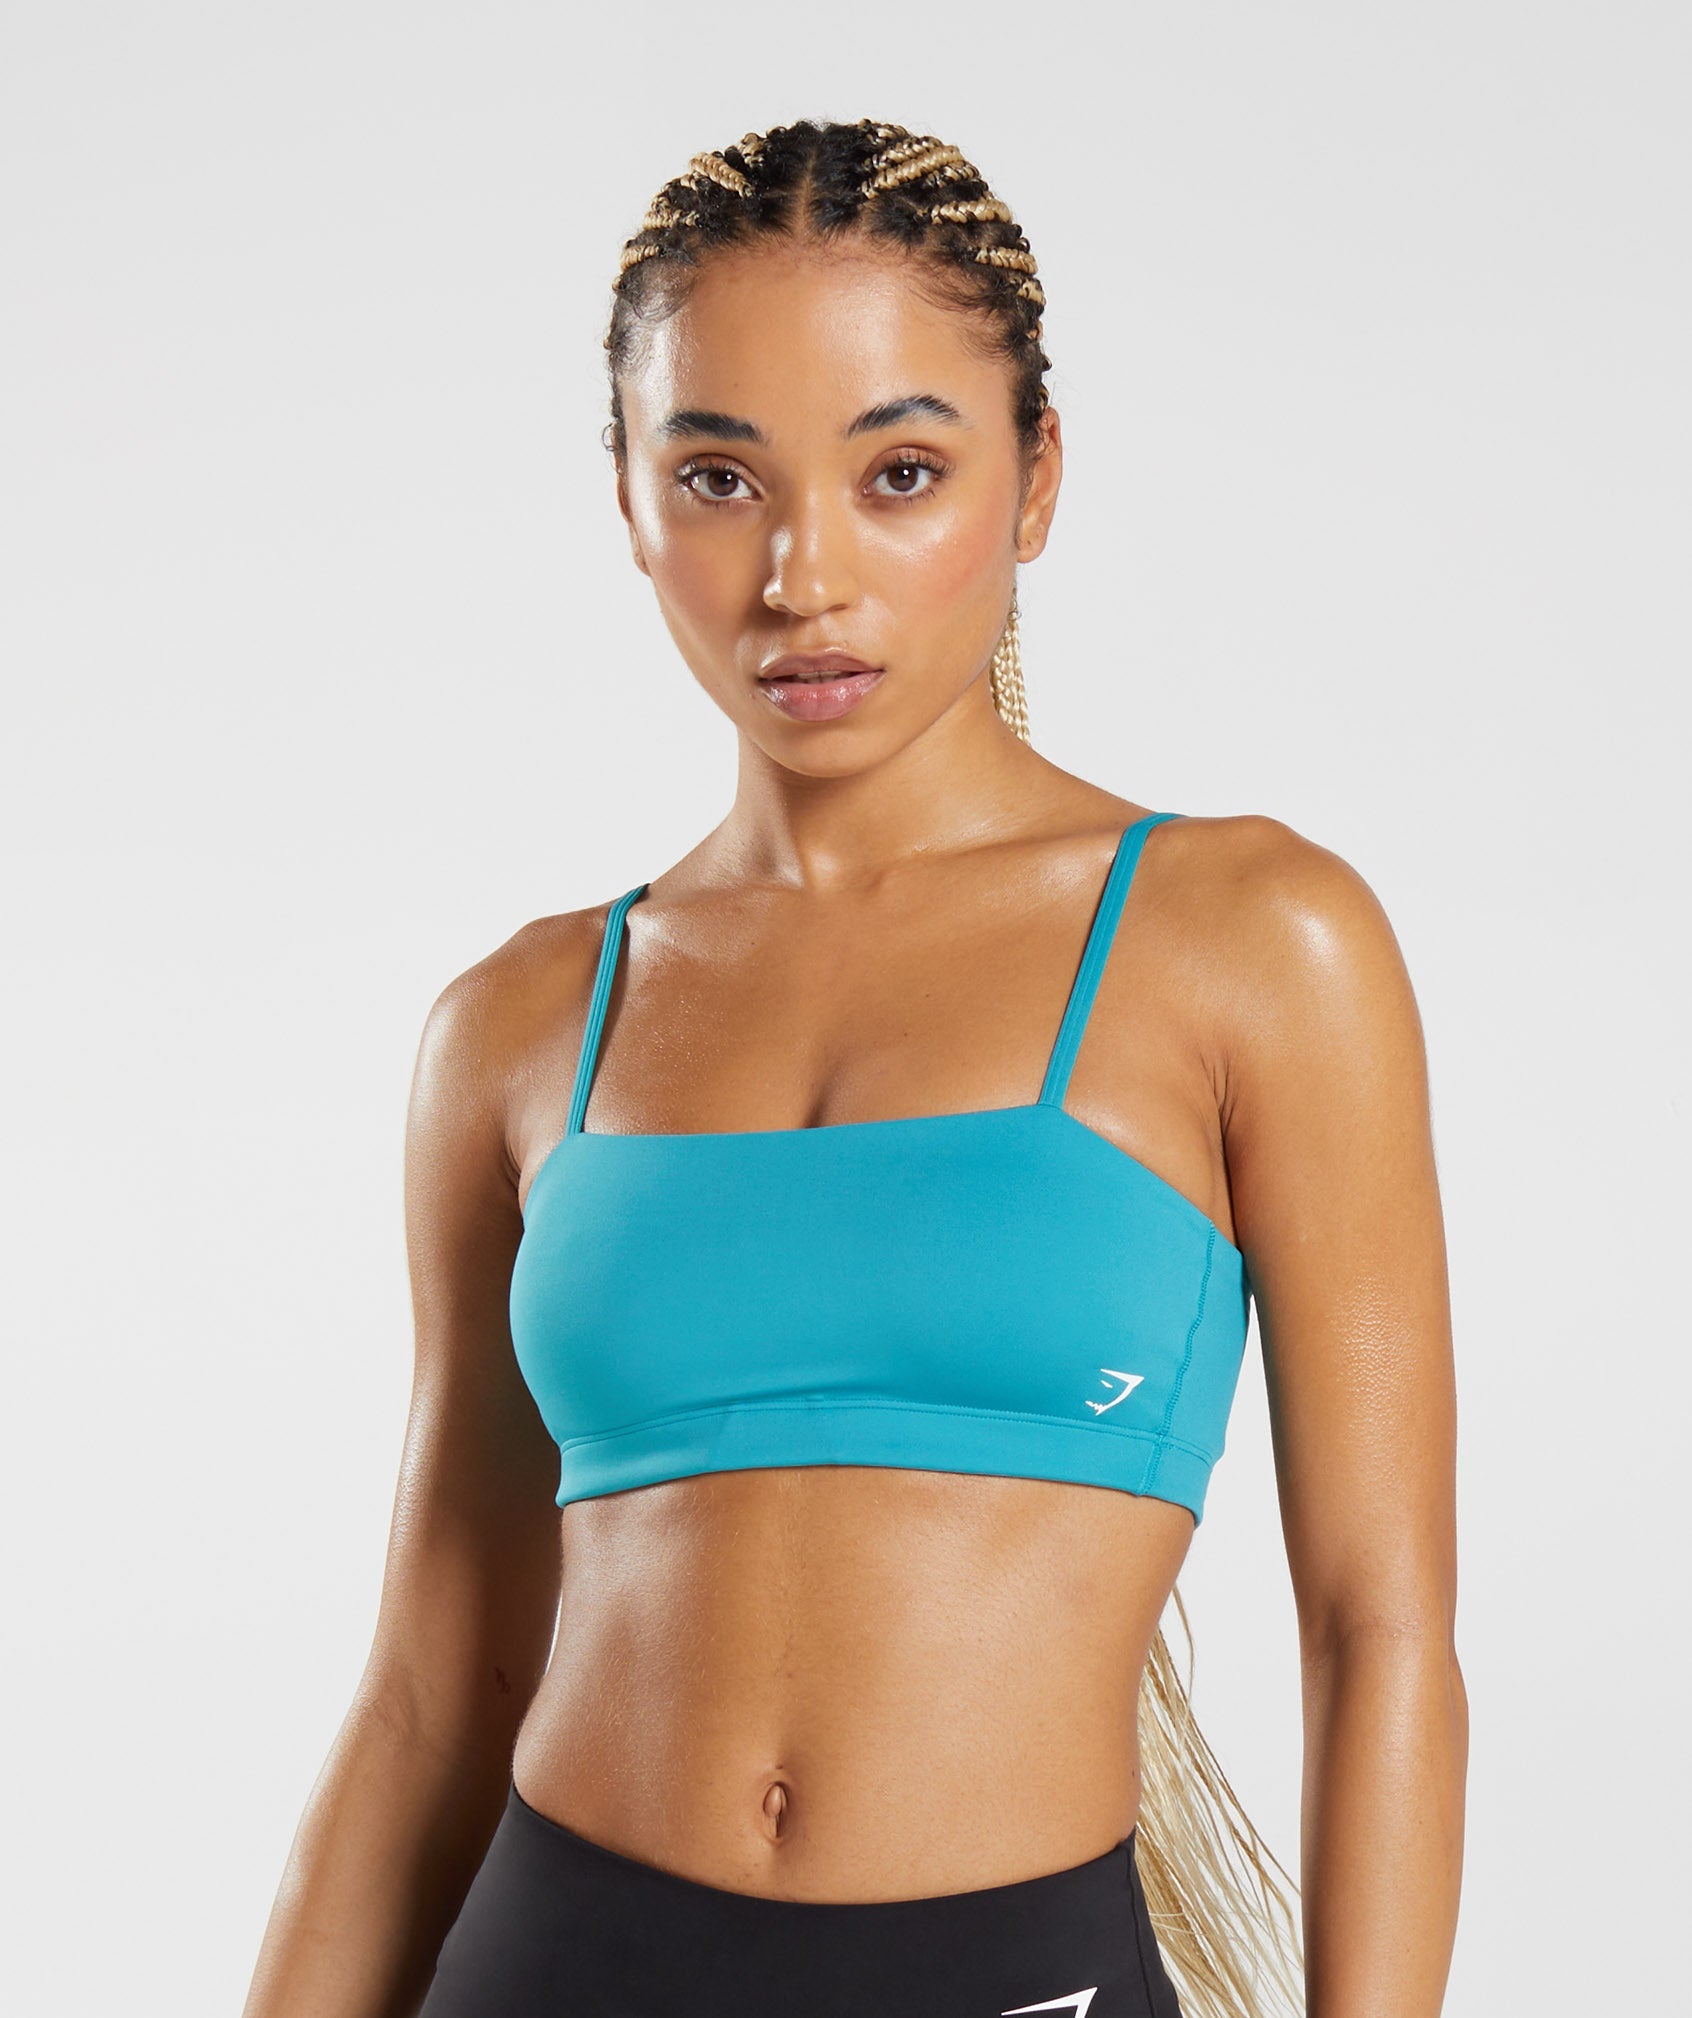 I didnt understand the @Gymshark bandeau sports bra hype until